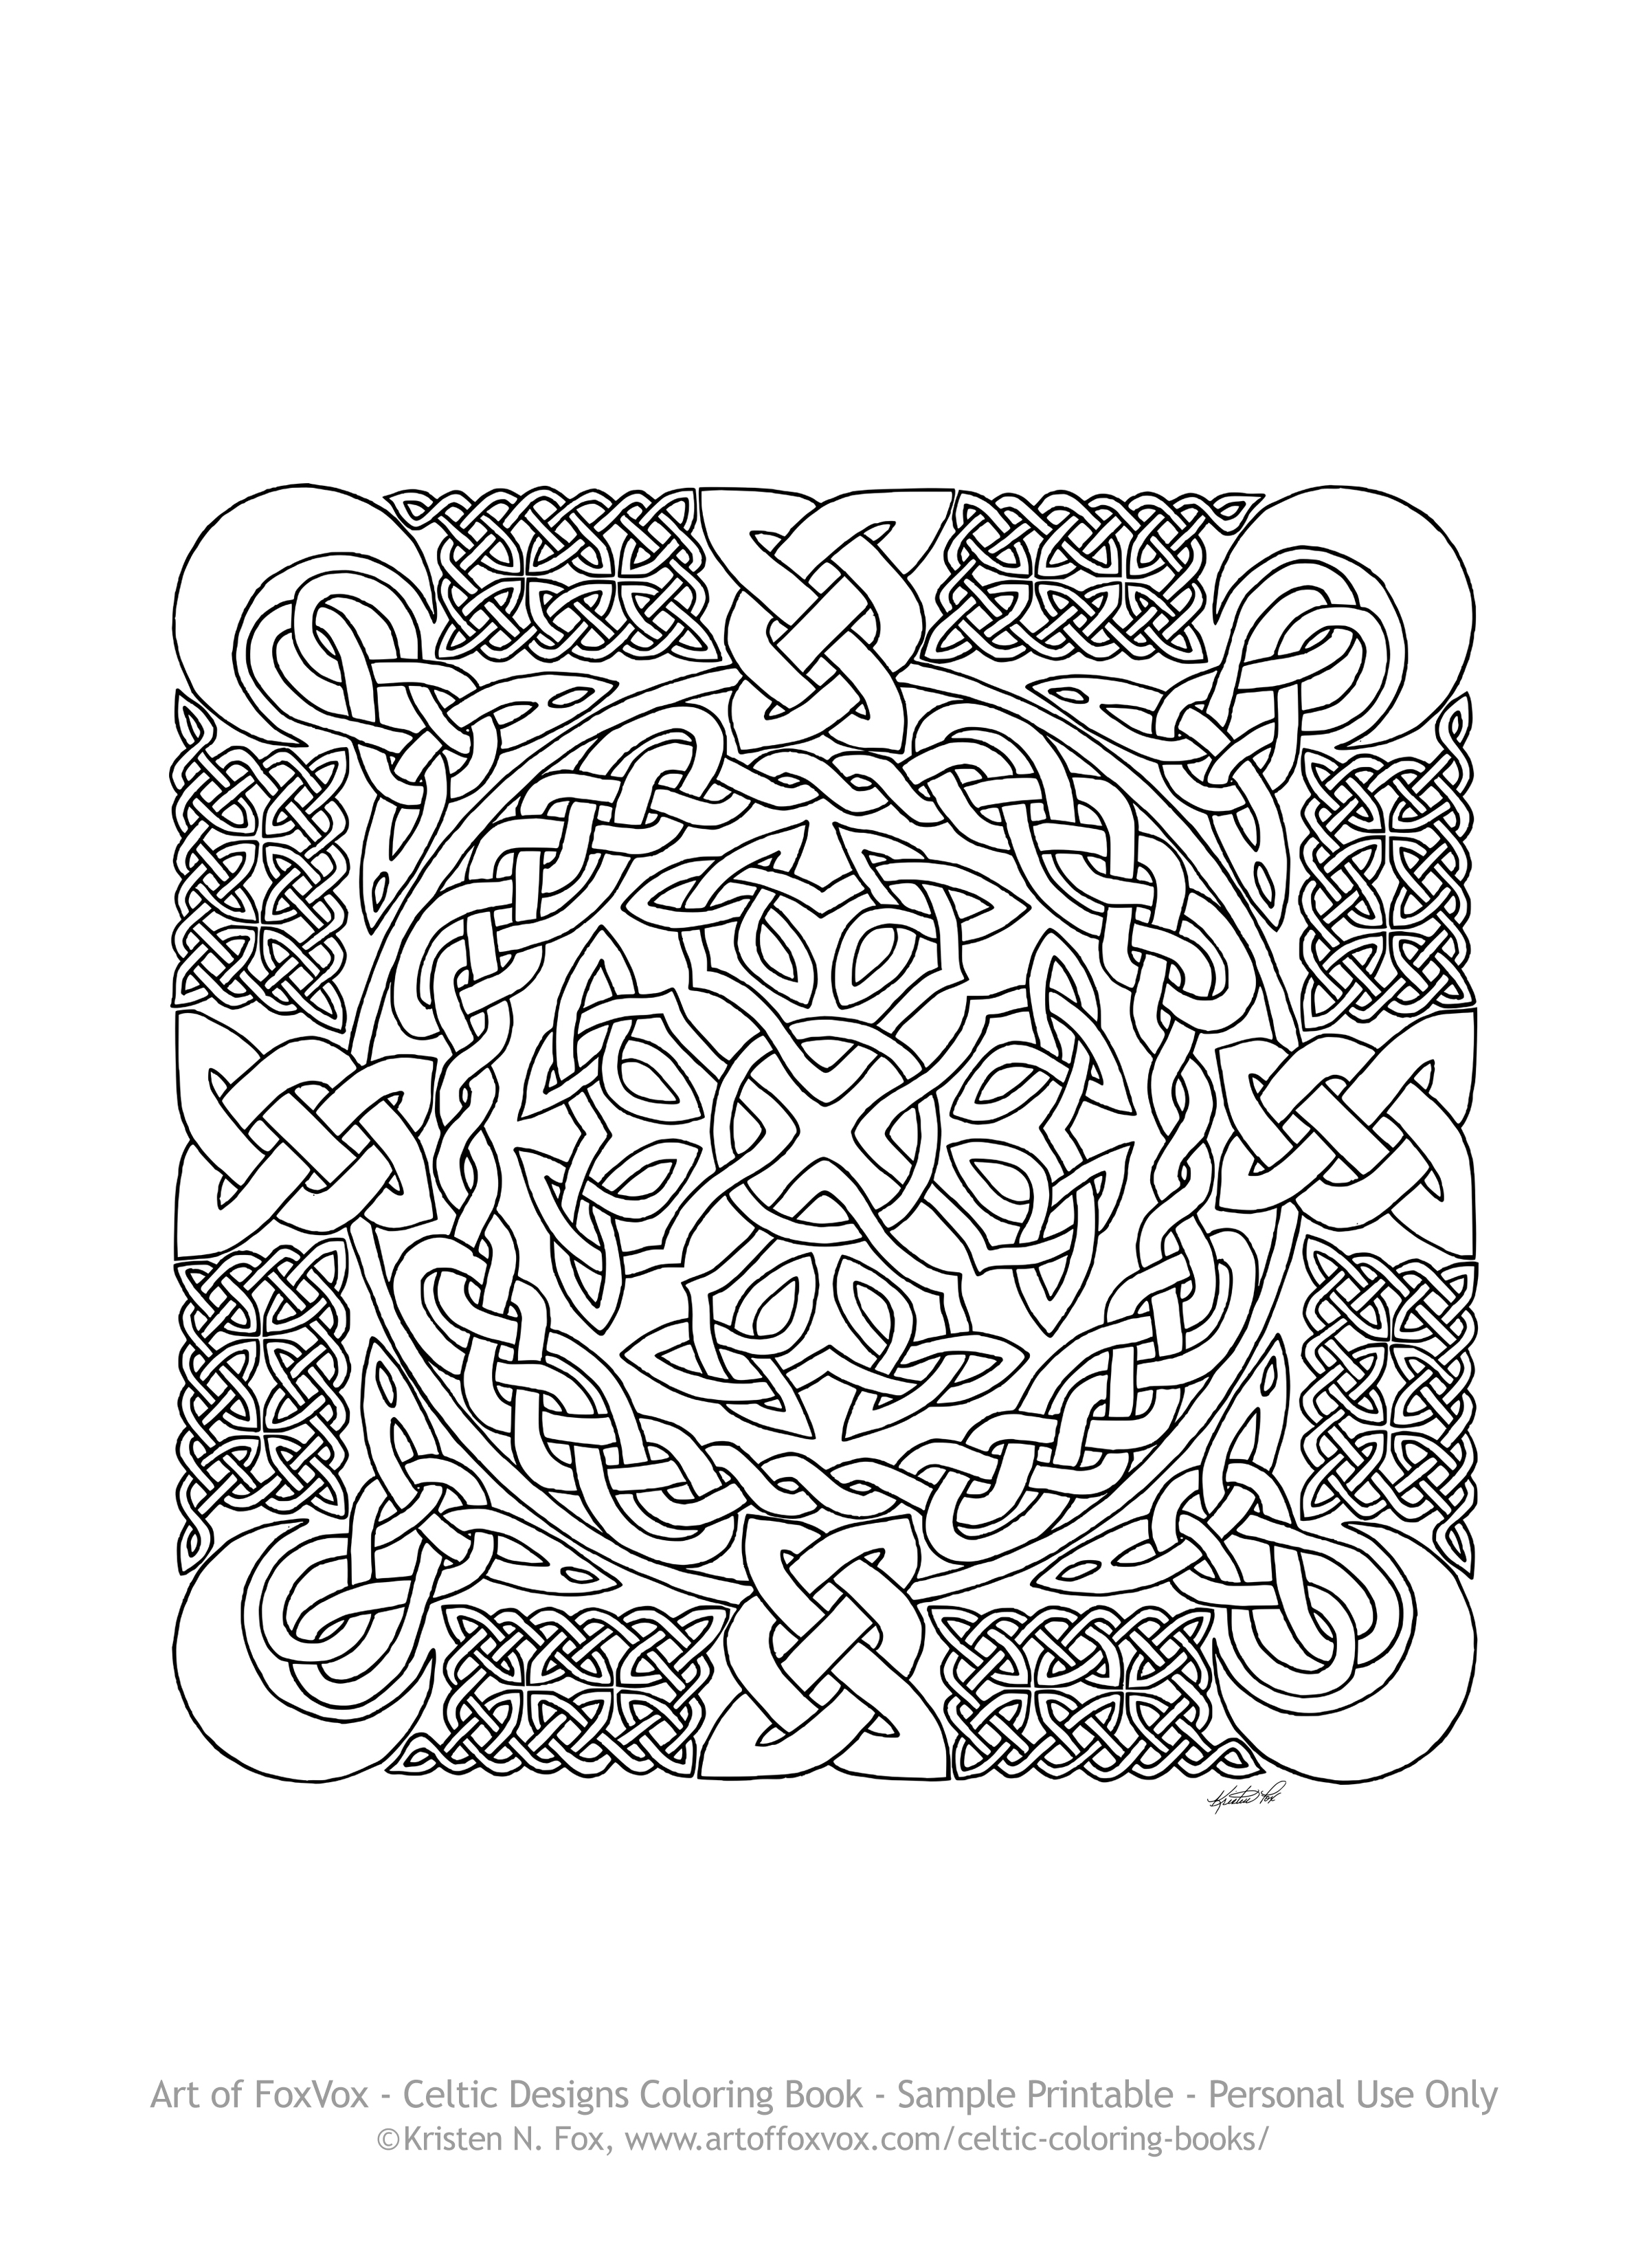 spiral designs coloring pages